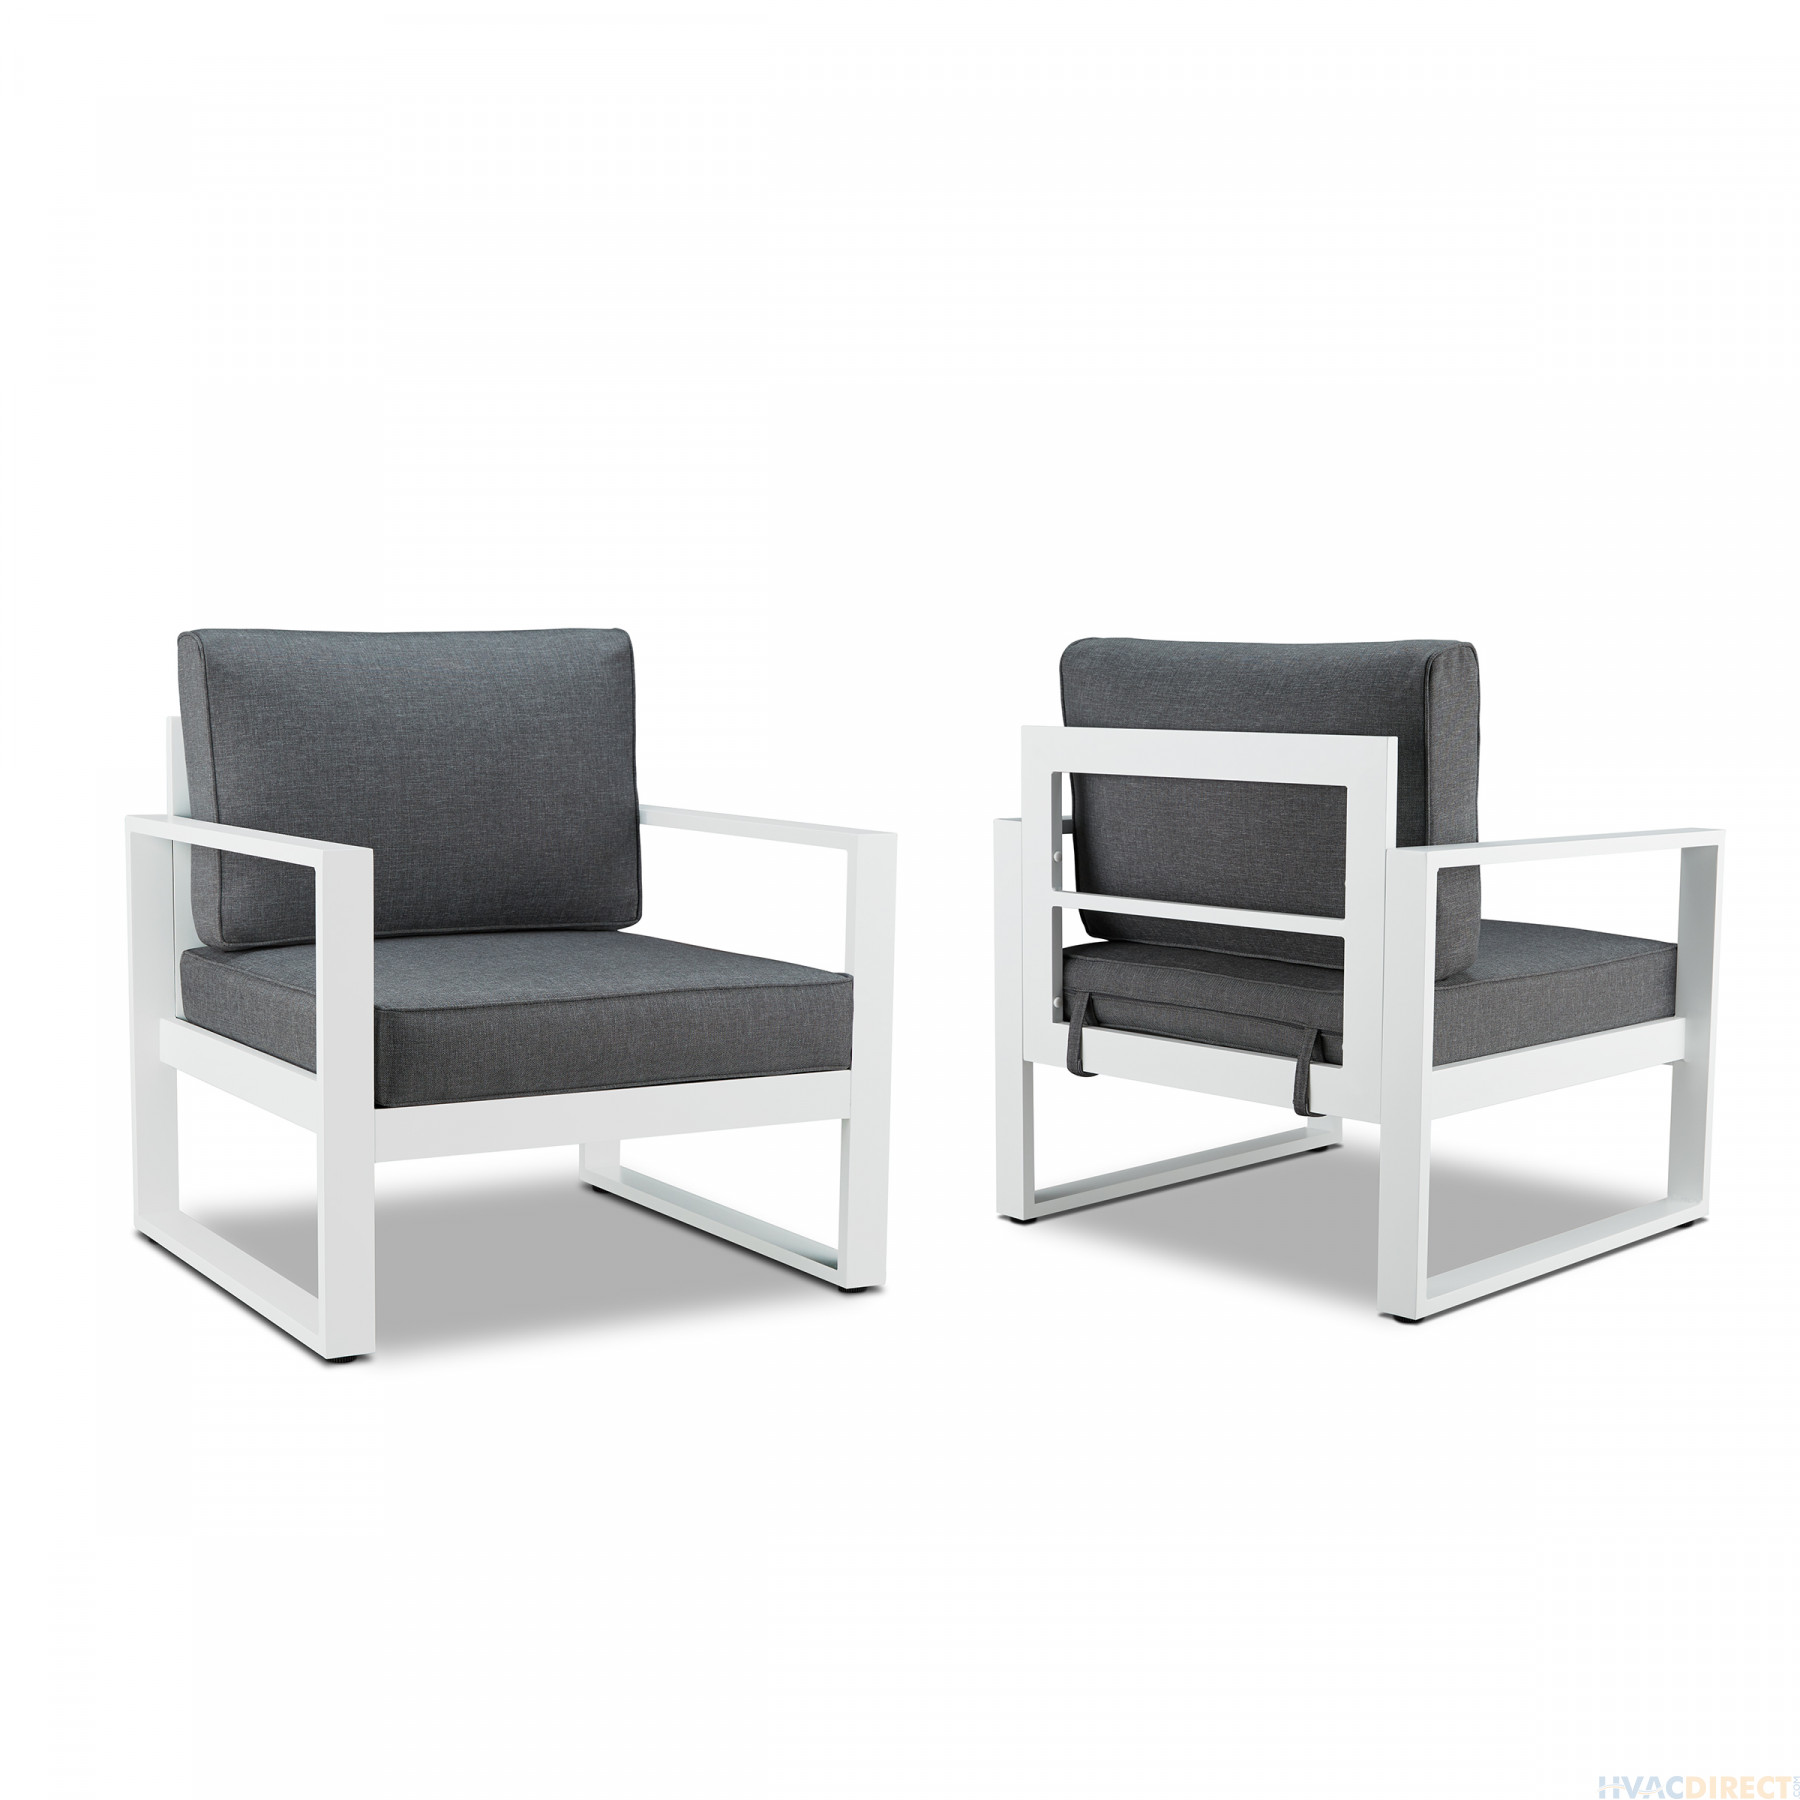 Real Flame Baltic Chair Set (2 Chairs) White - 9611-WHT